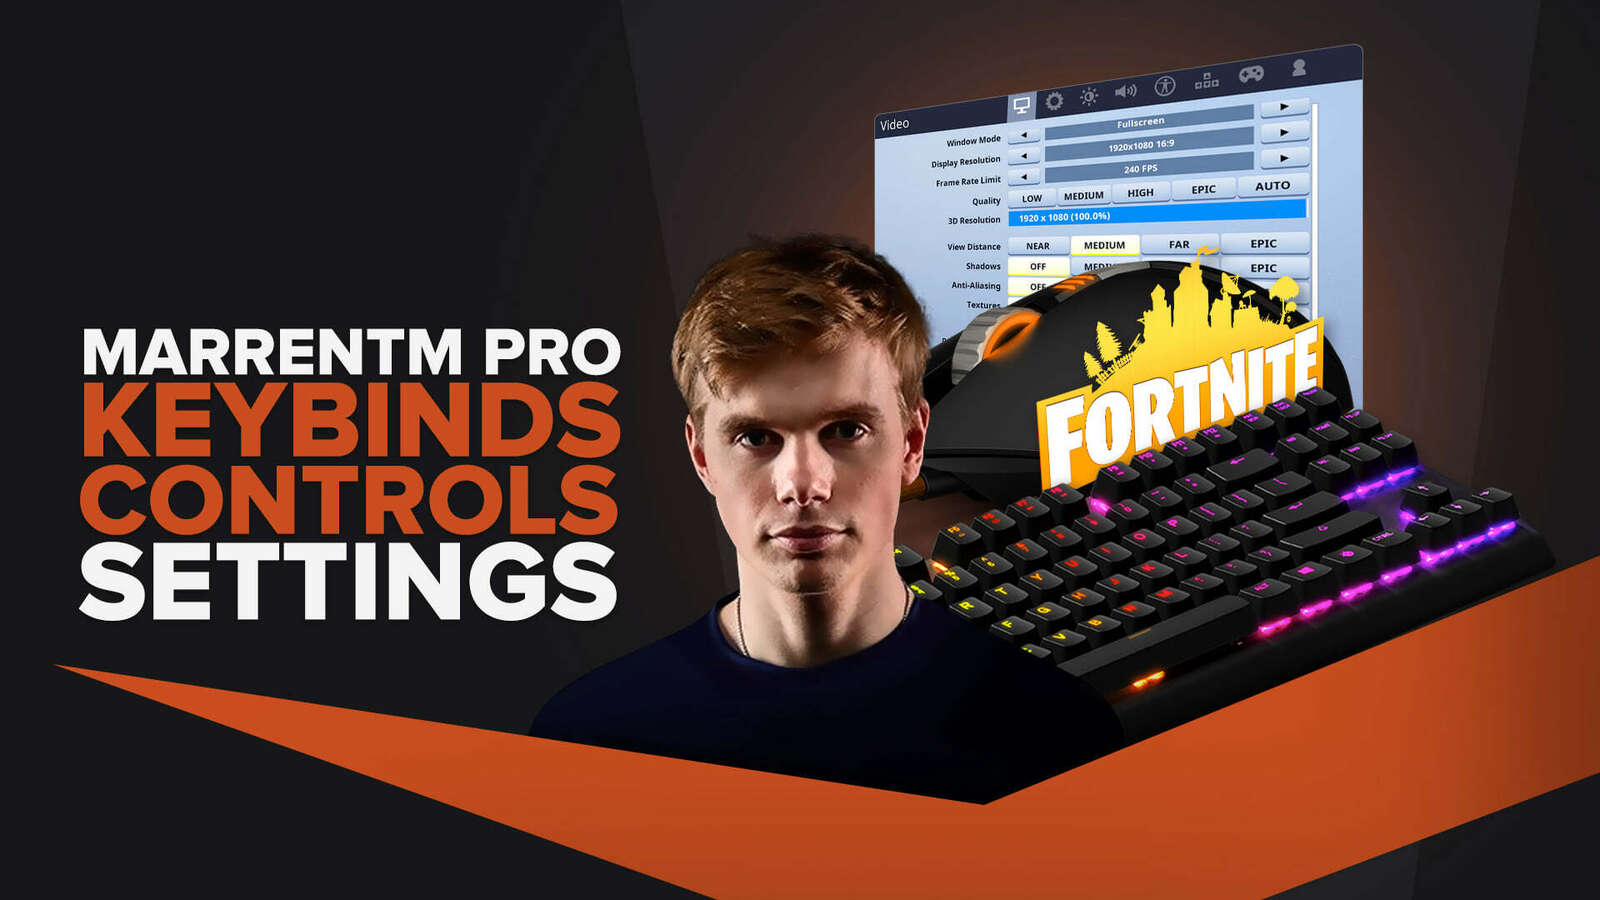 Marrentm's | Keybinds, Mouse, Video Pro Fornite Settings